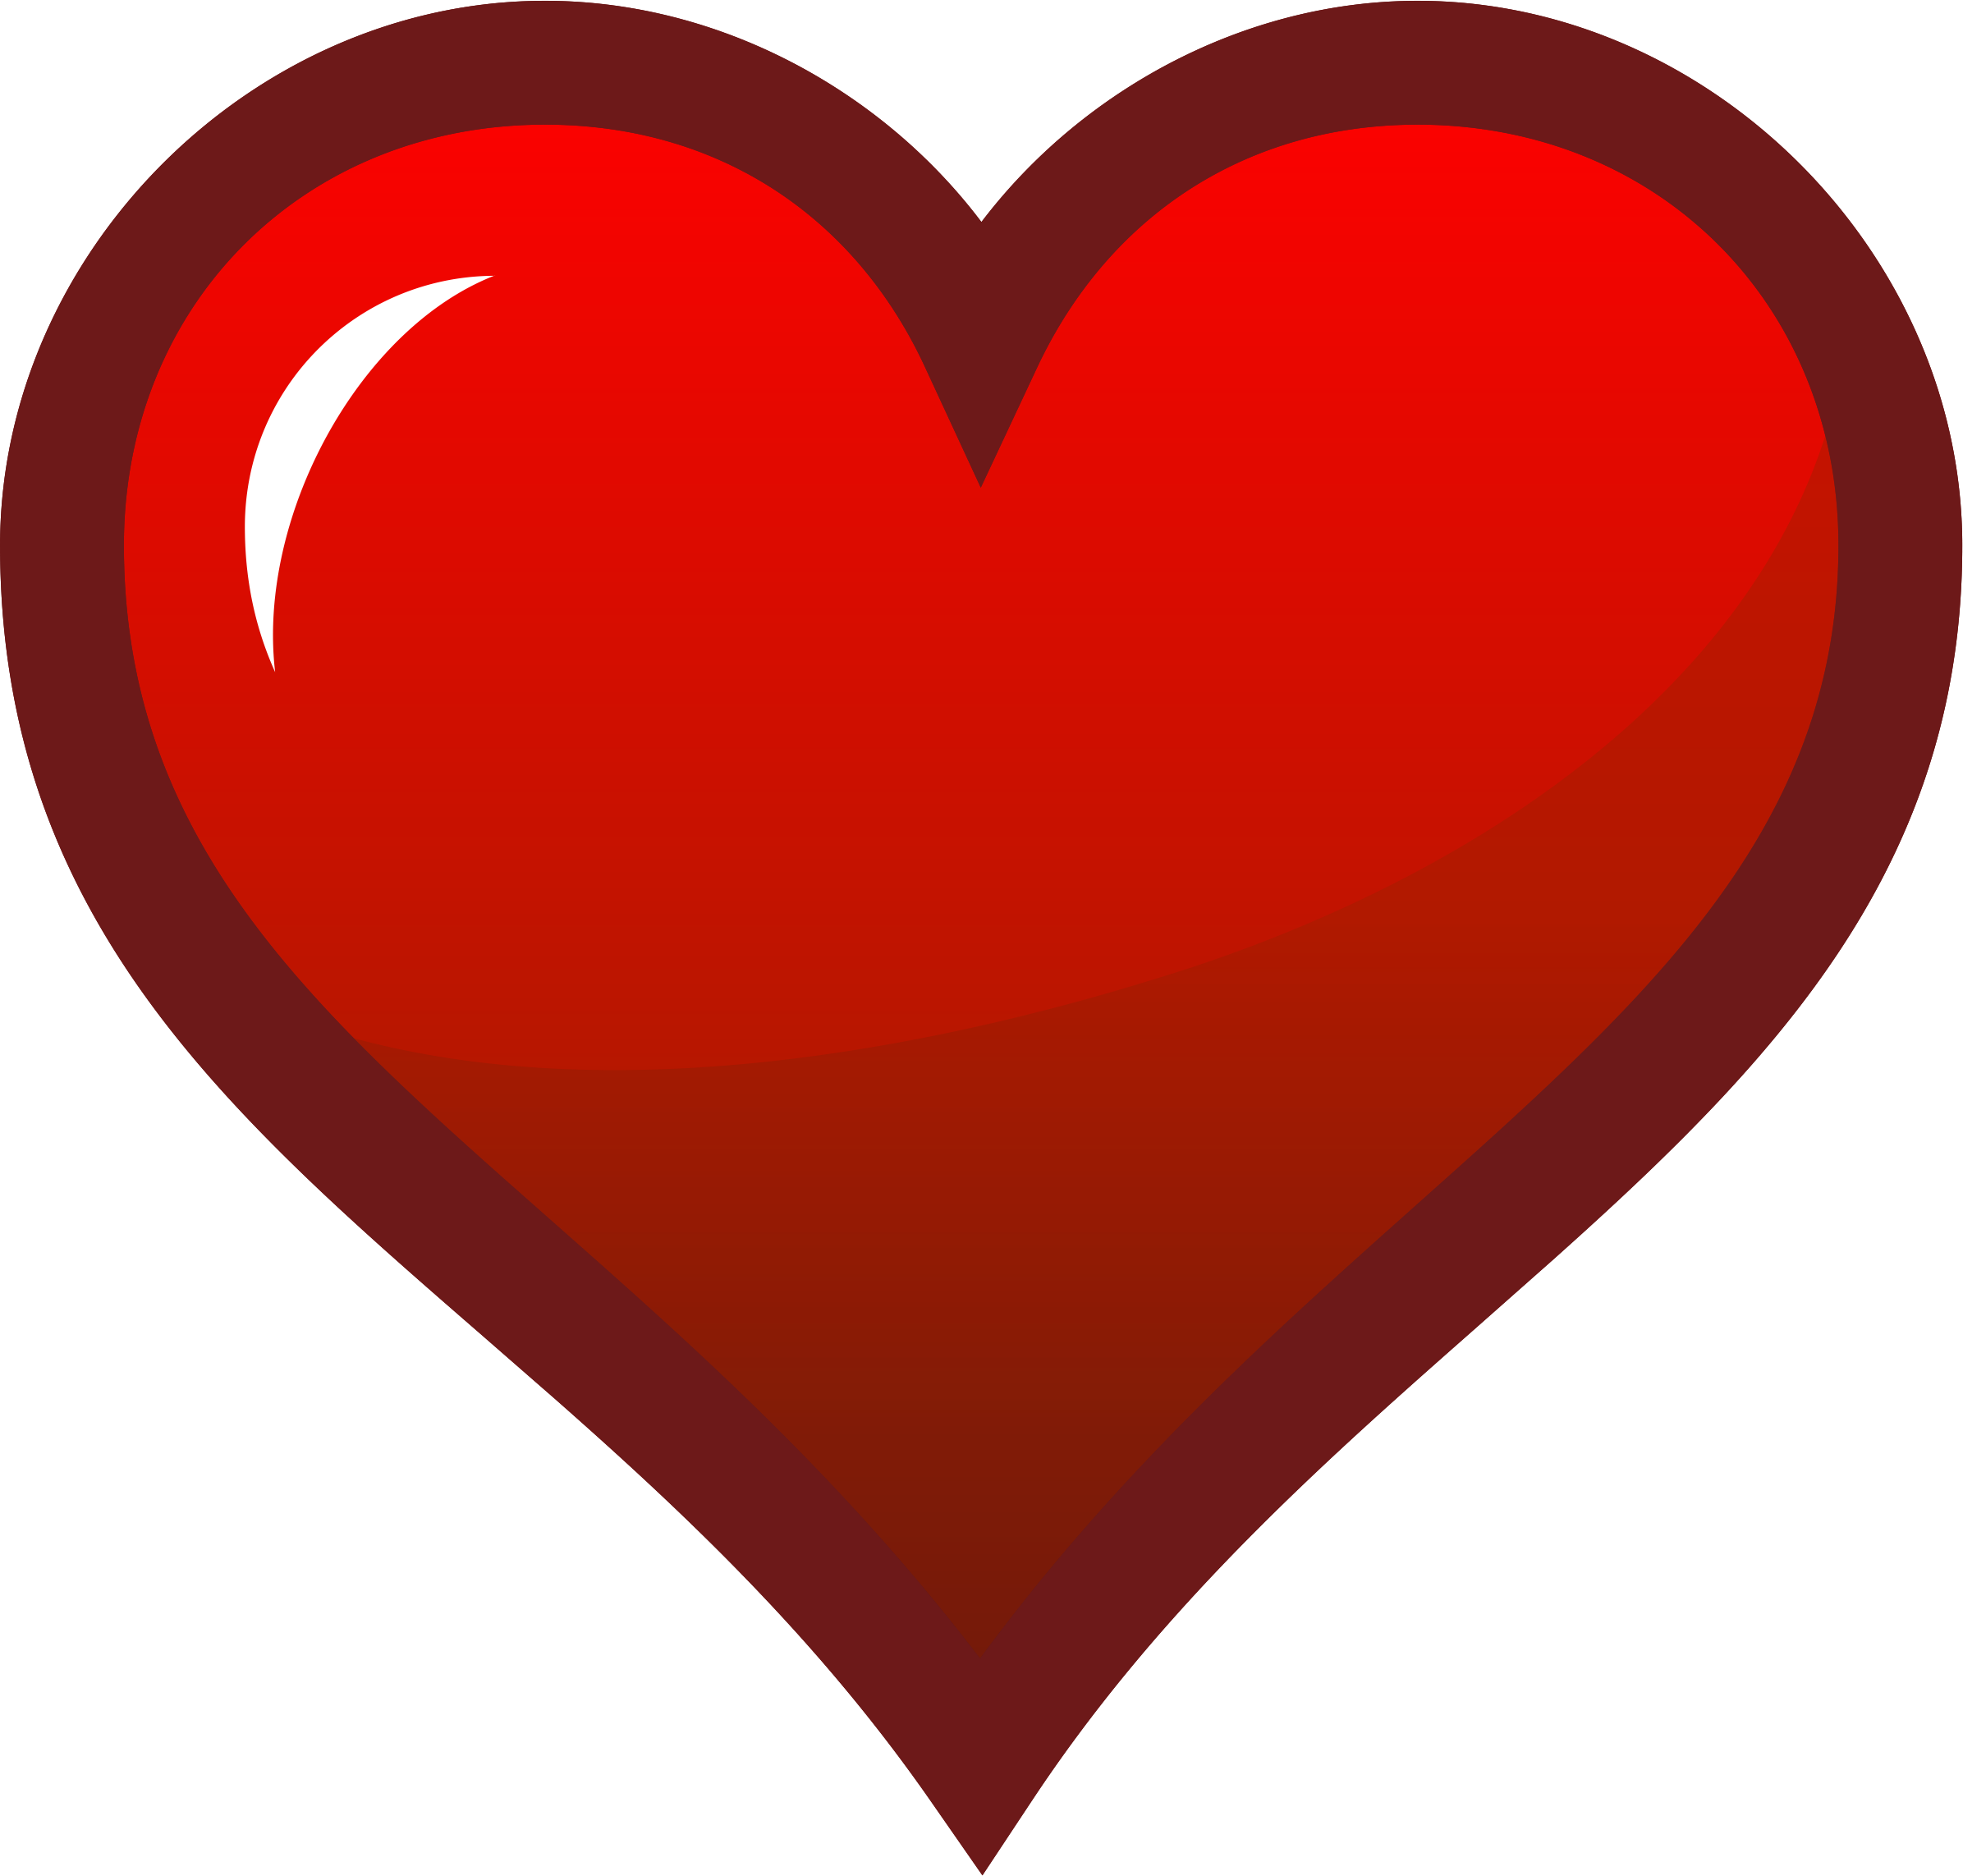 Big Red Heart Clipart